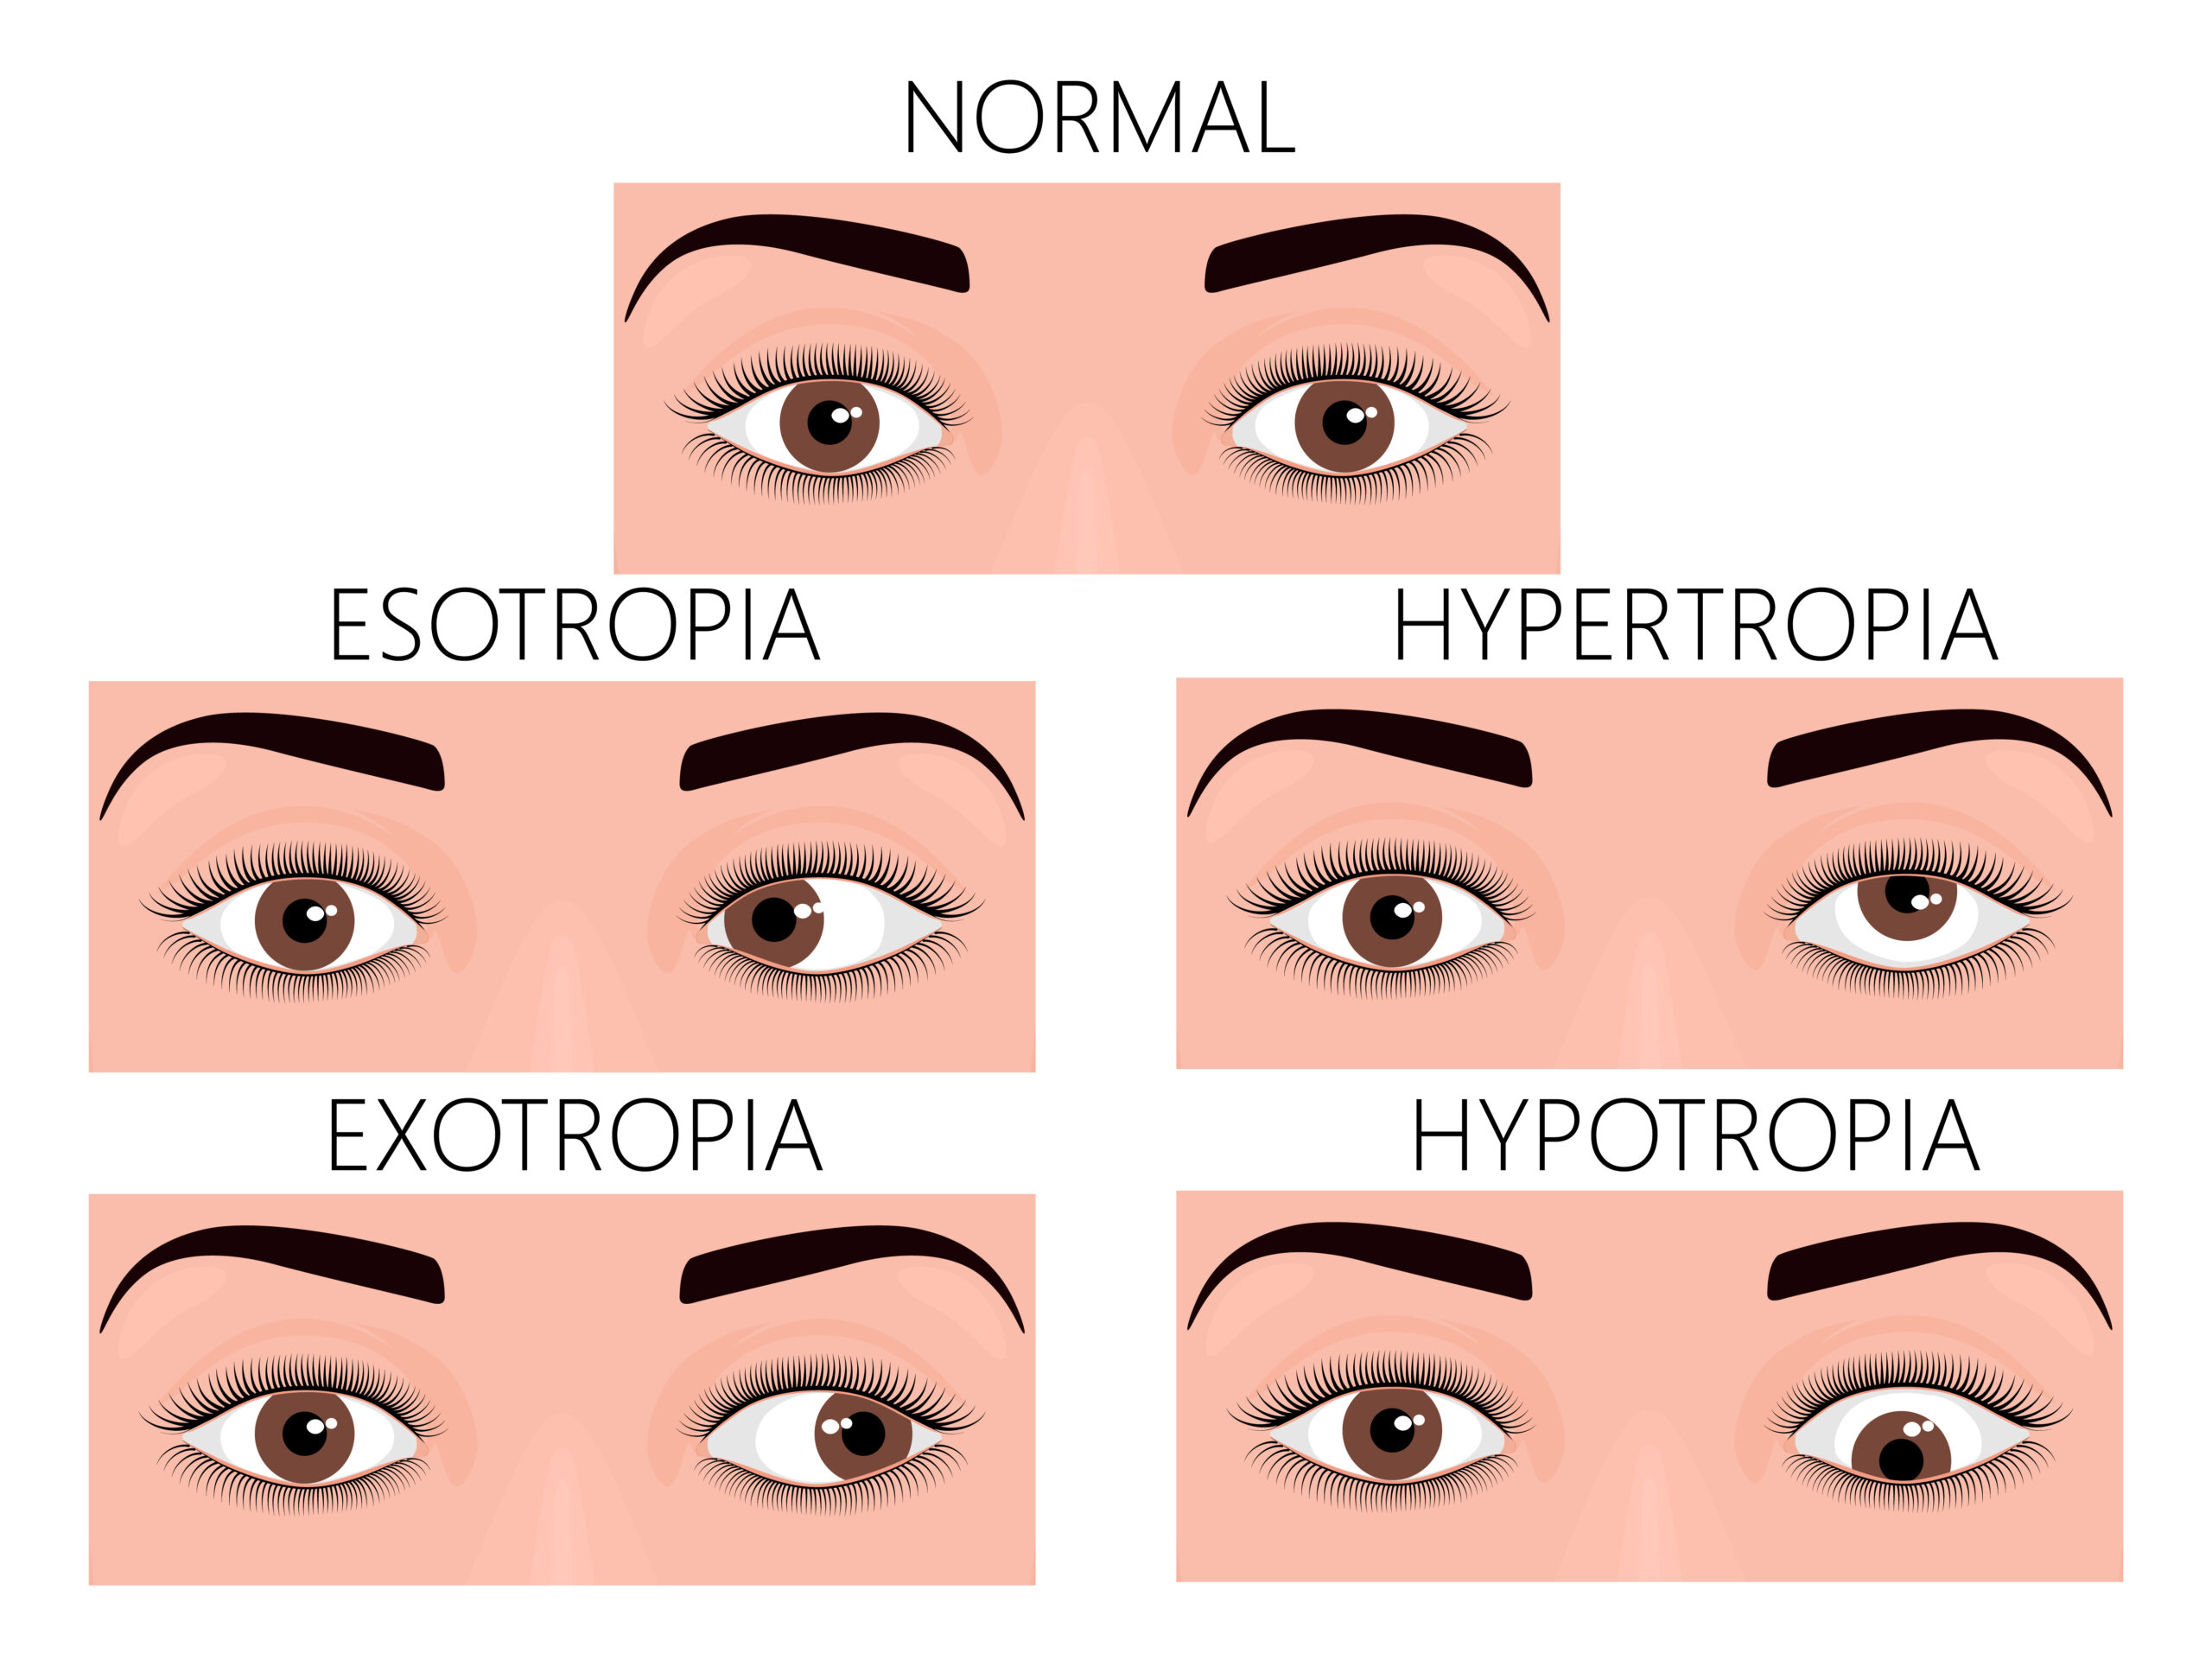 Strabismus: What Is, Causes, Types, Diagnosis, and Treatment